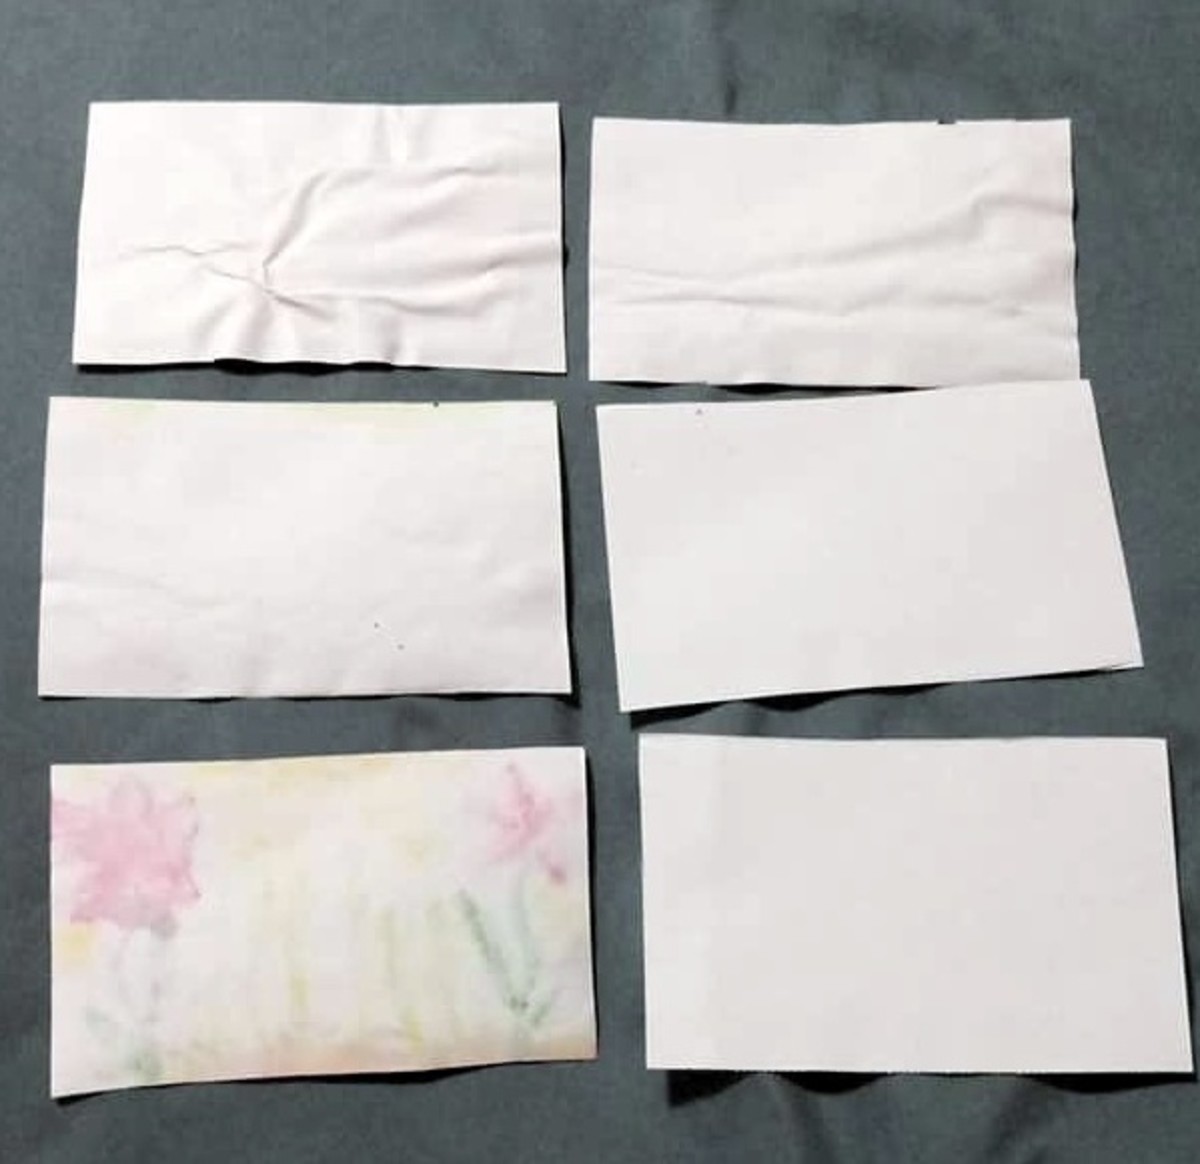 There are only 6 pieces shown because I had already started to work on a couple of the affirmation cards.,,,but you get the idea.